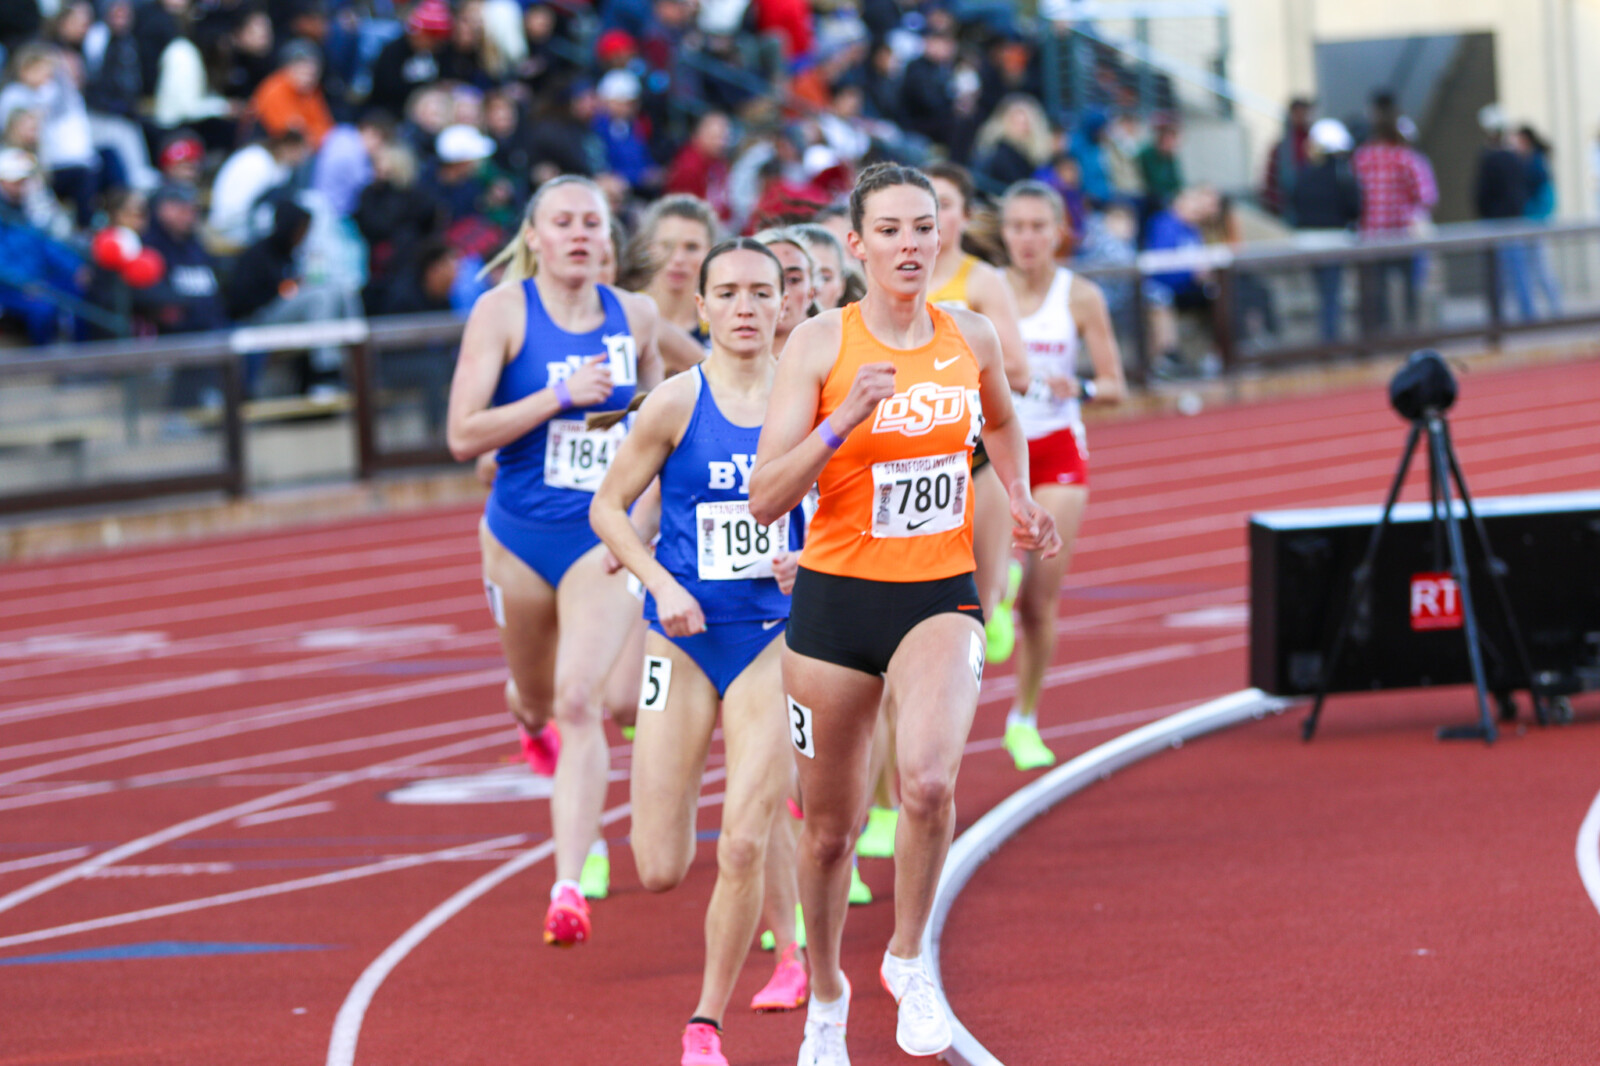 Sivan Auerbach ran in an athletics competition in an Oklahoma State uniform (Photo: Oklahoma State XC/TF)